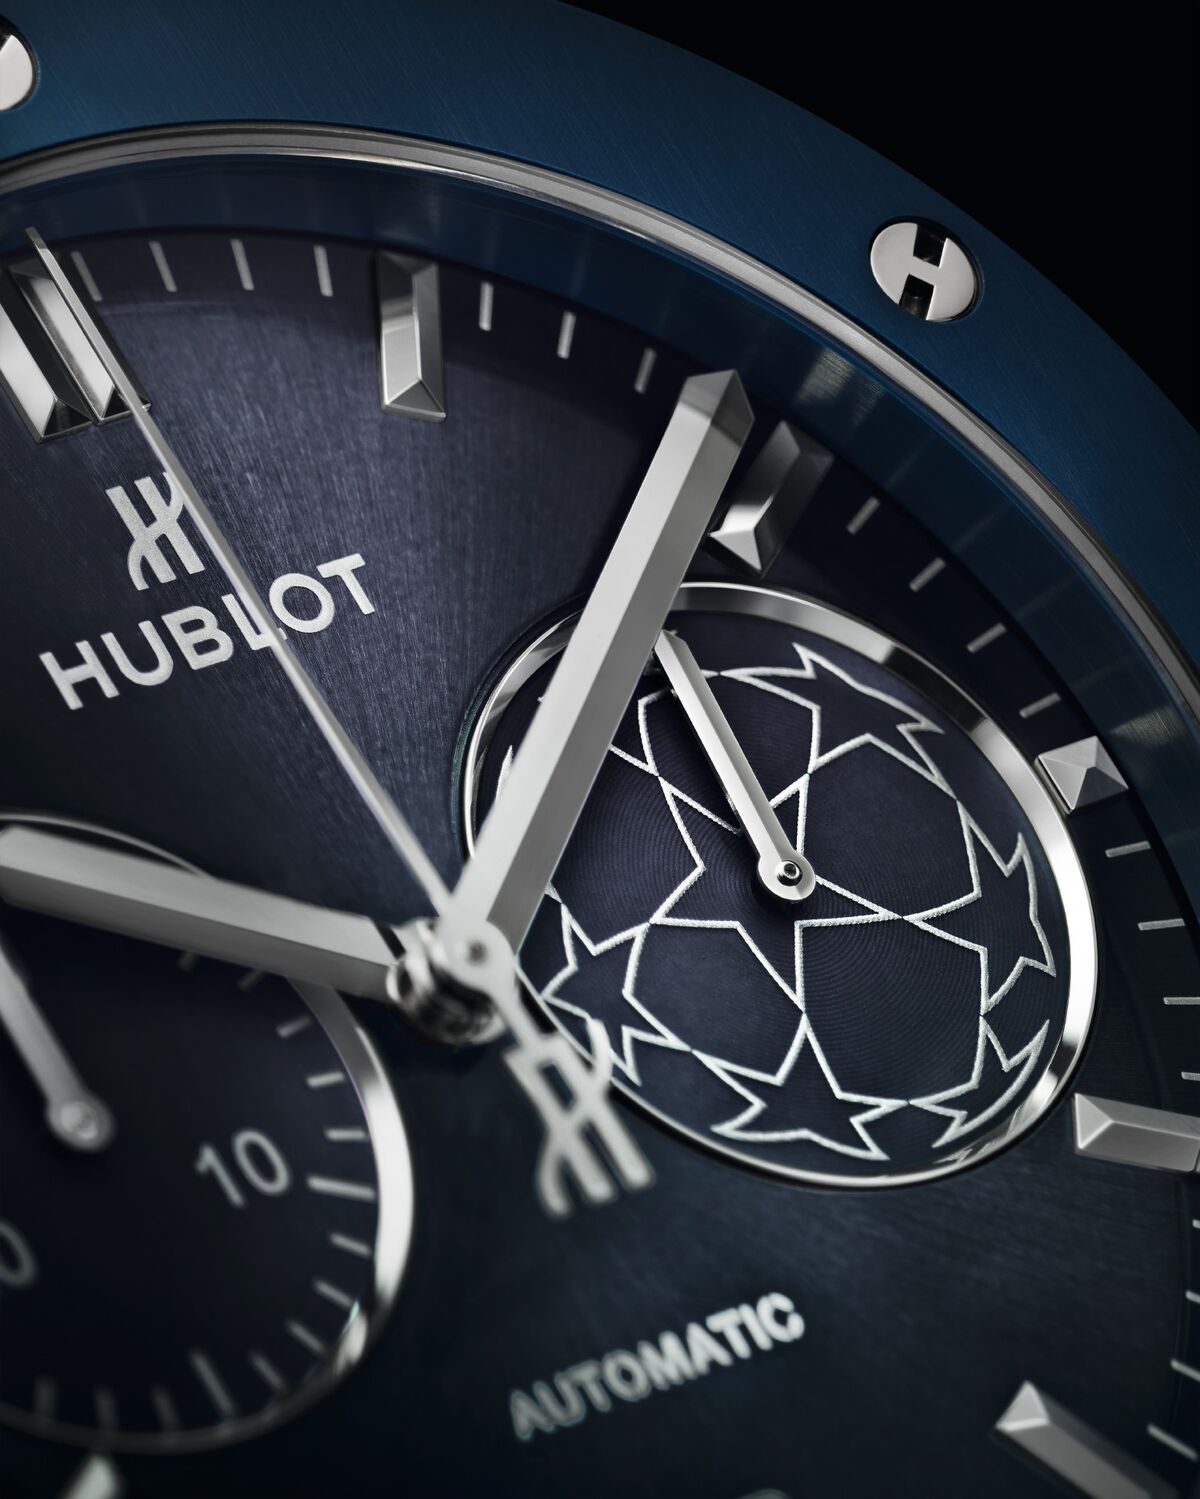 Keeping time: Hublot at the Uefa European Championship in France - SportsPro